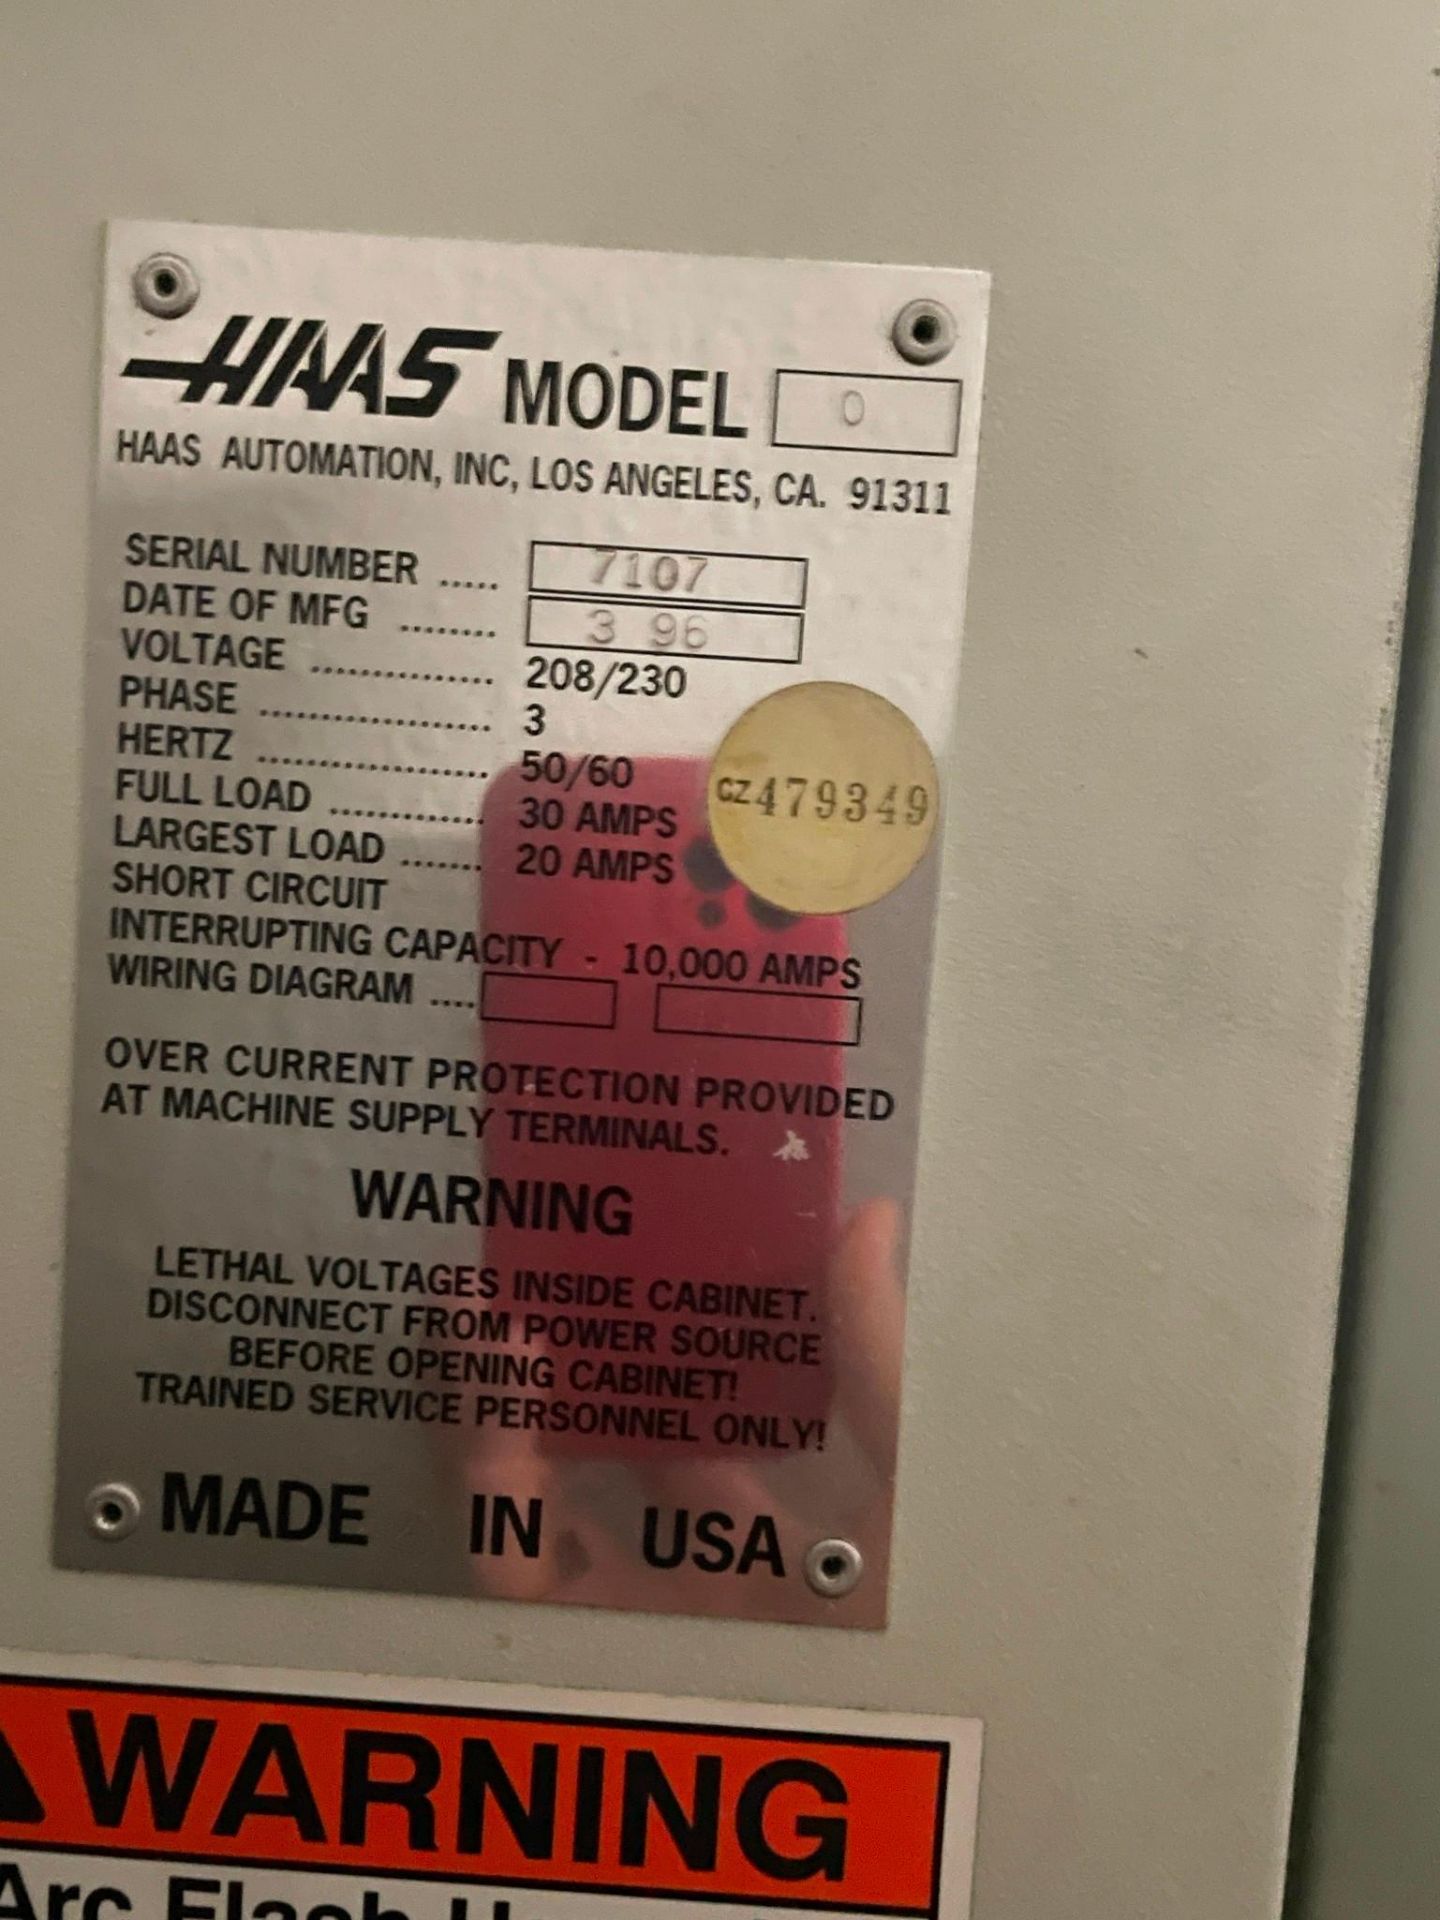 HAAS VF-0 VERTICAL MACHINING CENTER, YEAR 1996 - USED - Image 8 of 8